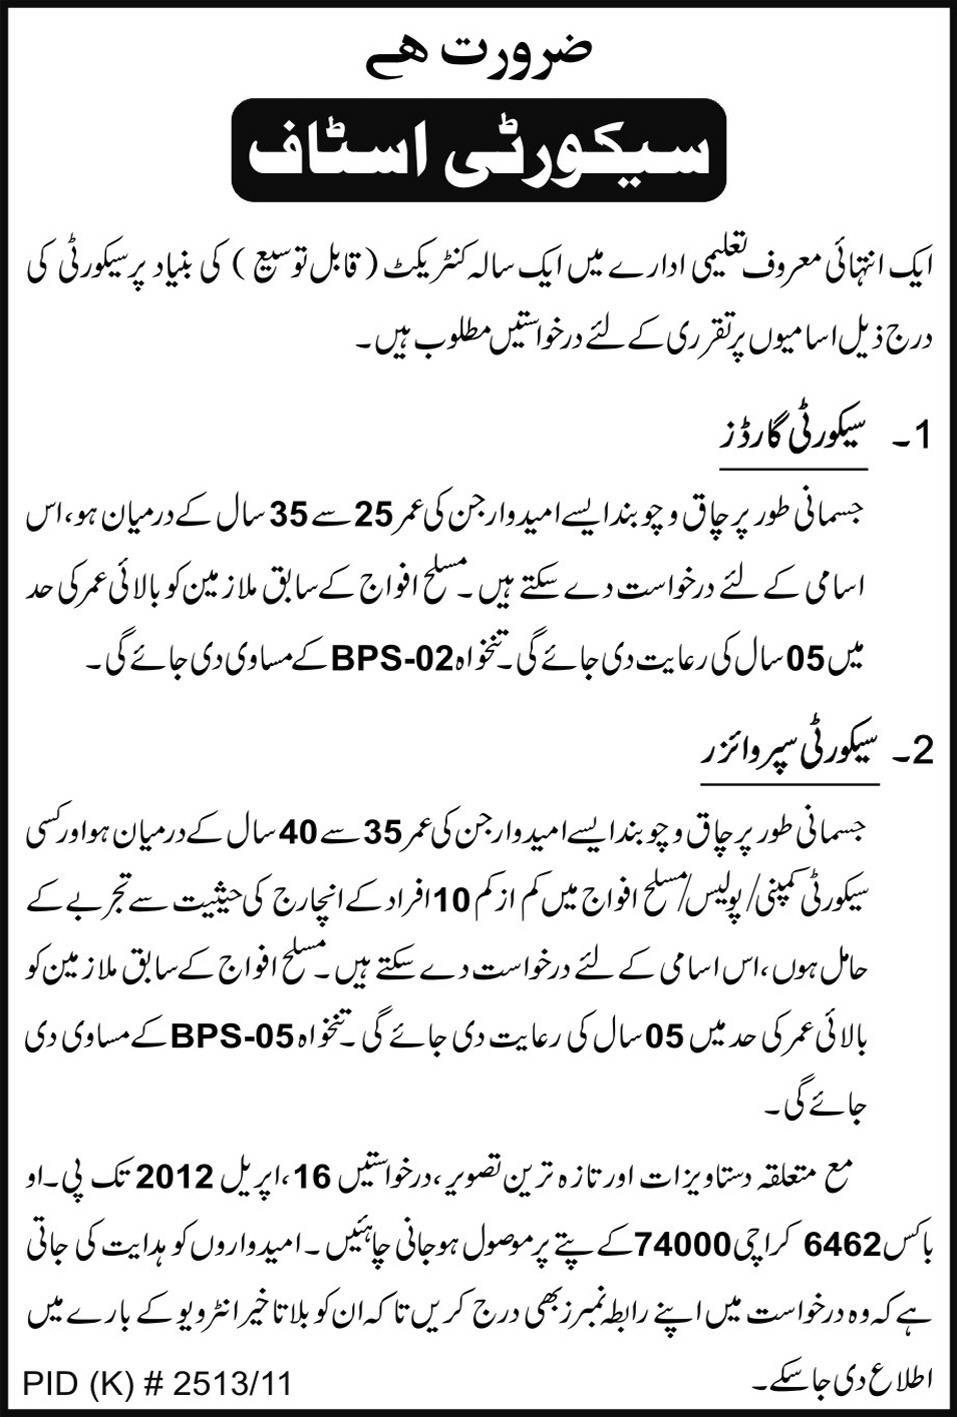 Security Guards and Security Supervisors (Govt. Jobs) Required by an Educational Organization